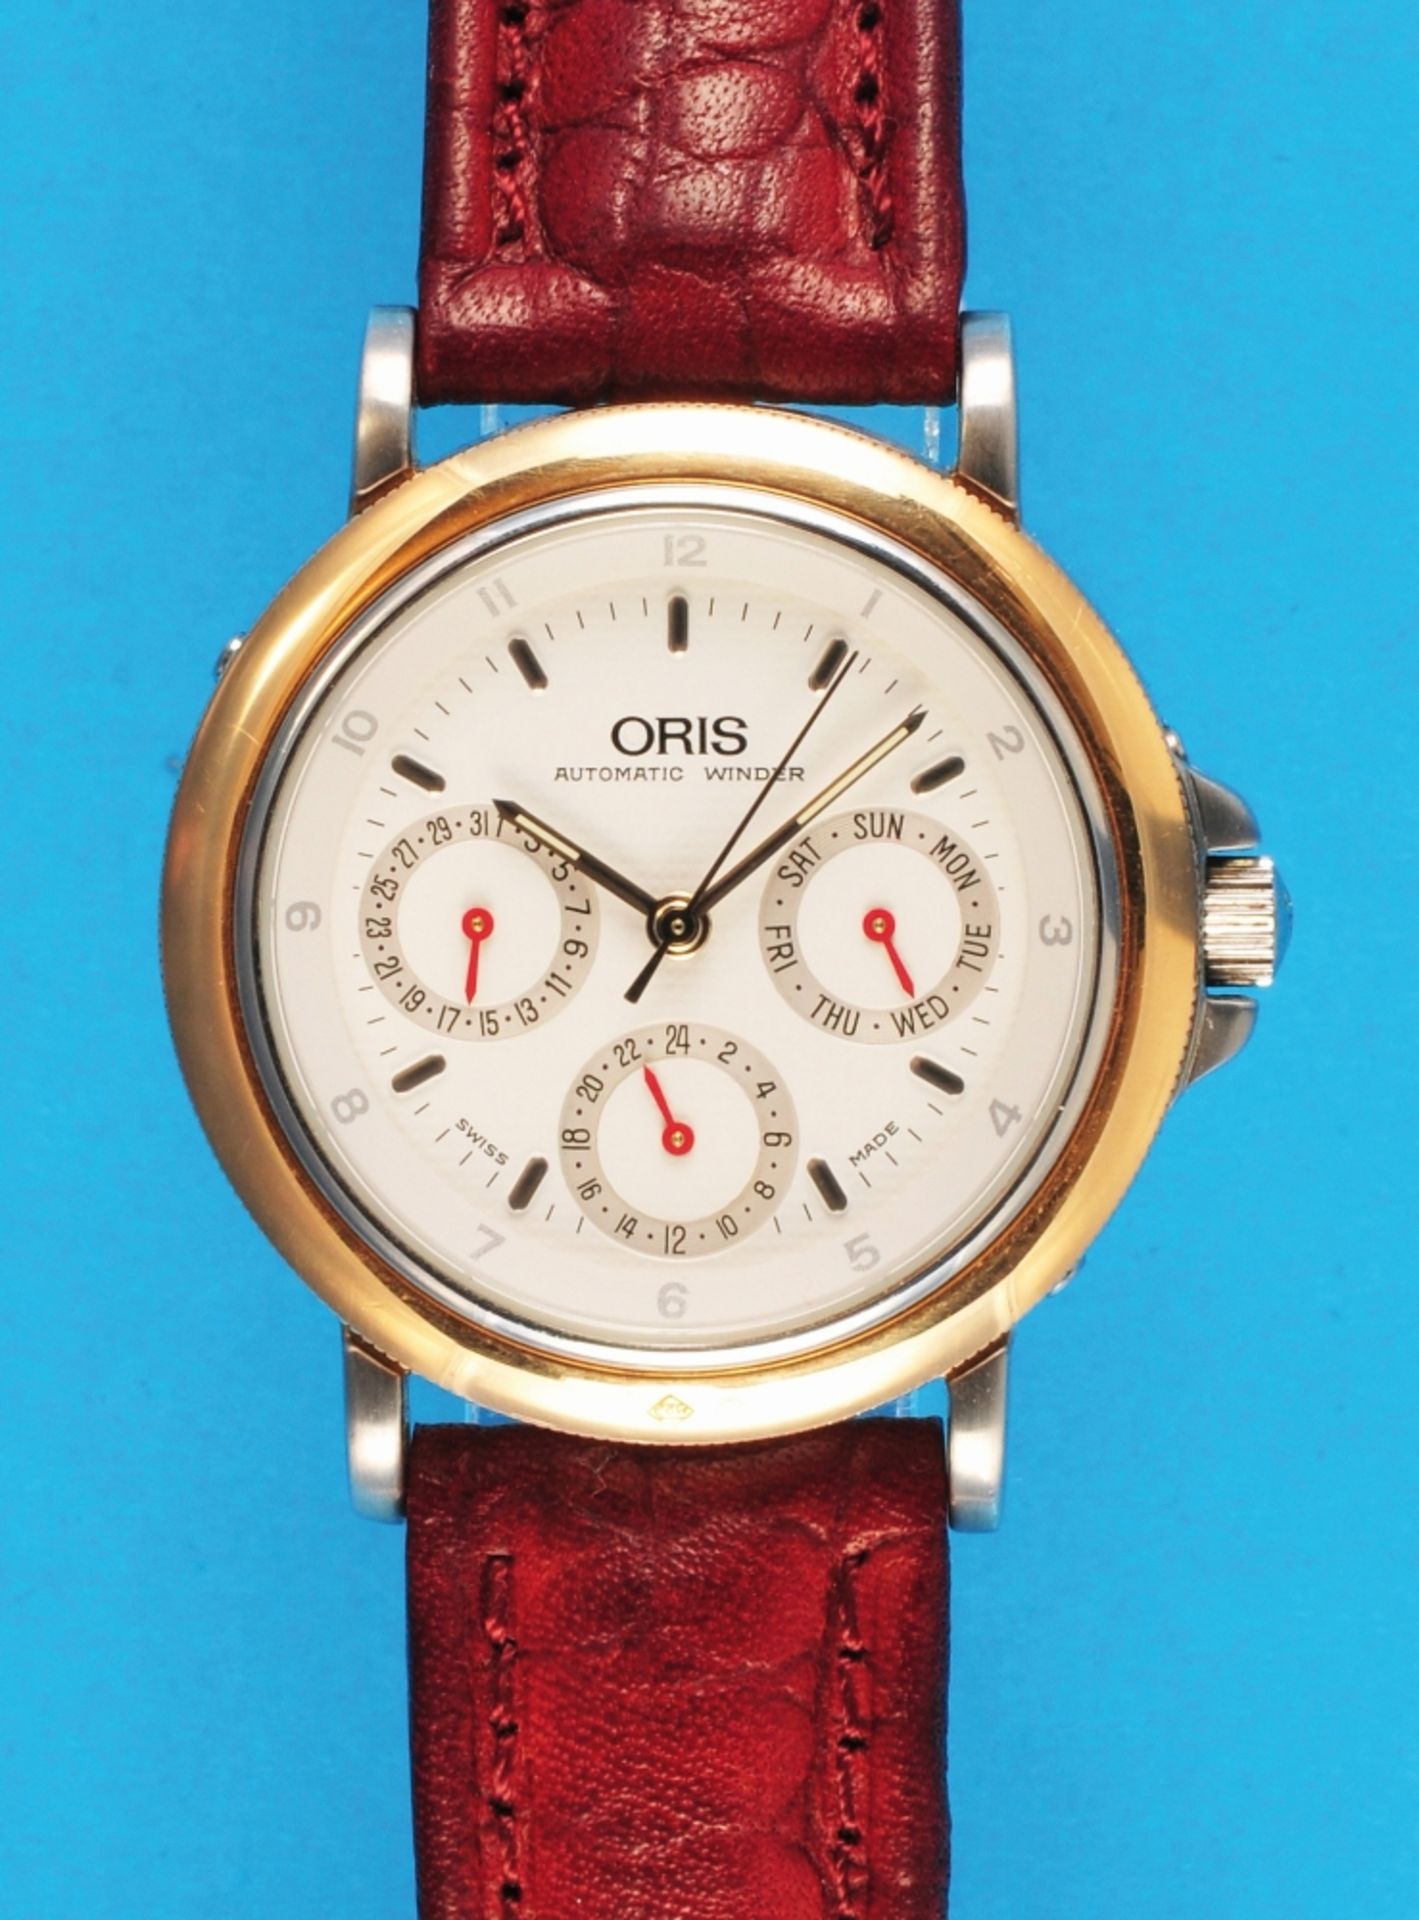 Oris Automatic Winder Bi- Colour wristwatch with calendar and central second hand